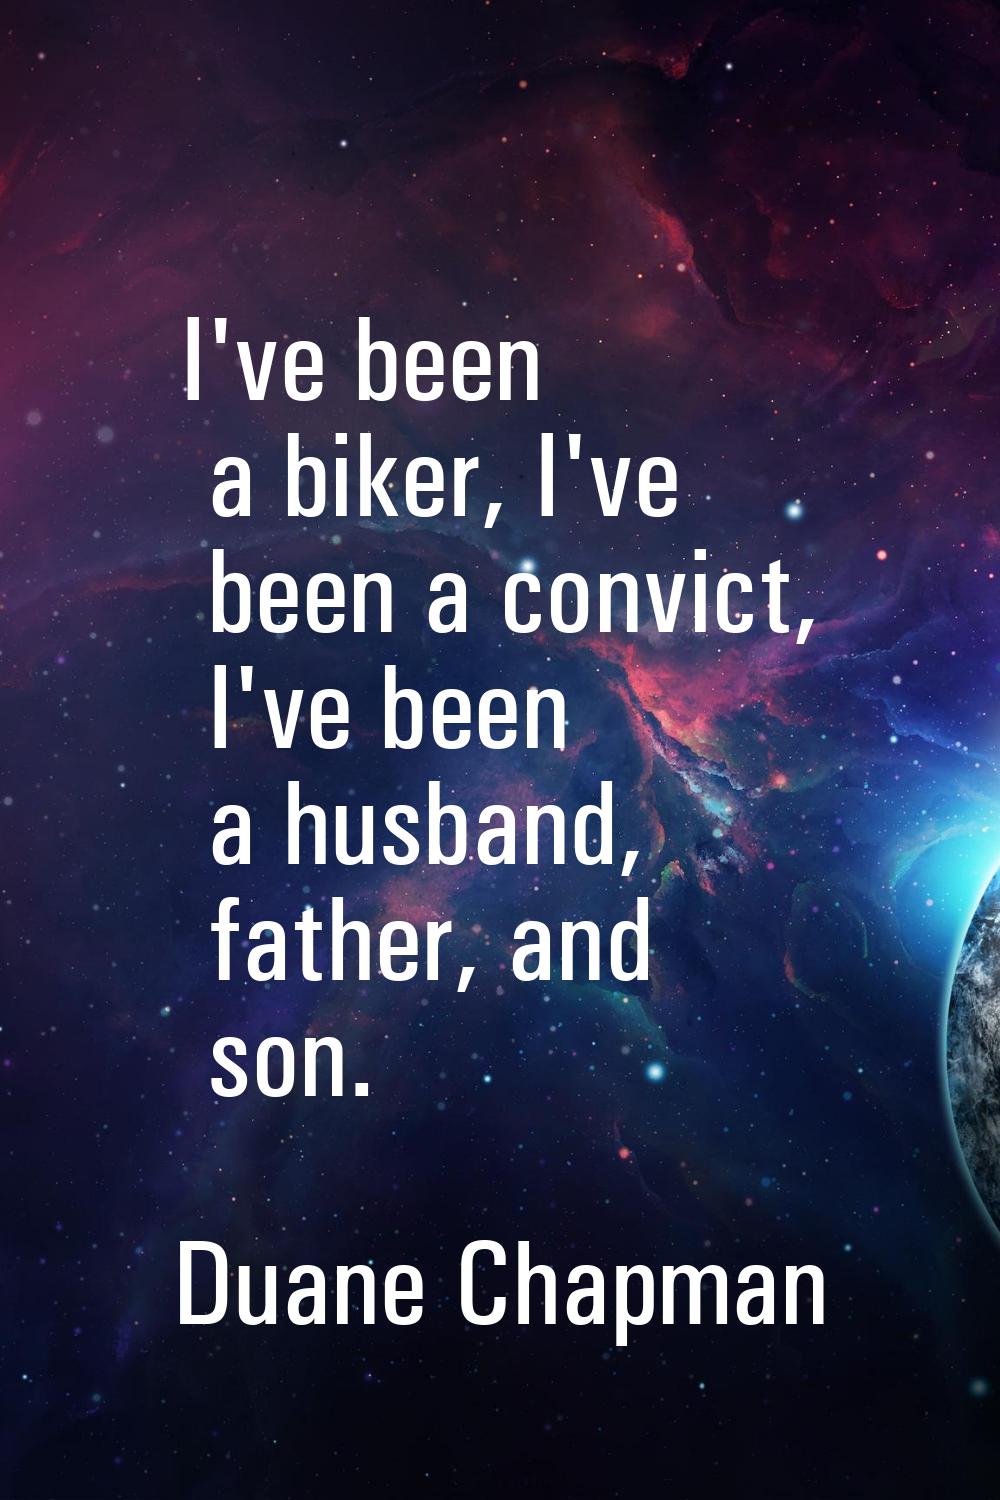 I've been a biker, I've been a convict, I've been a husband, father, and son.